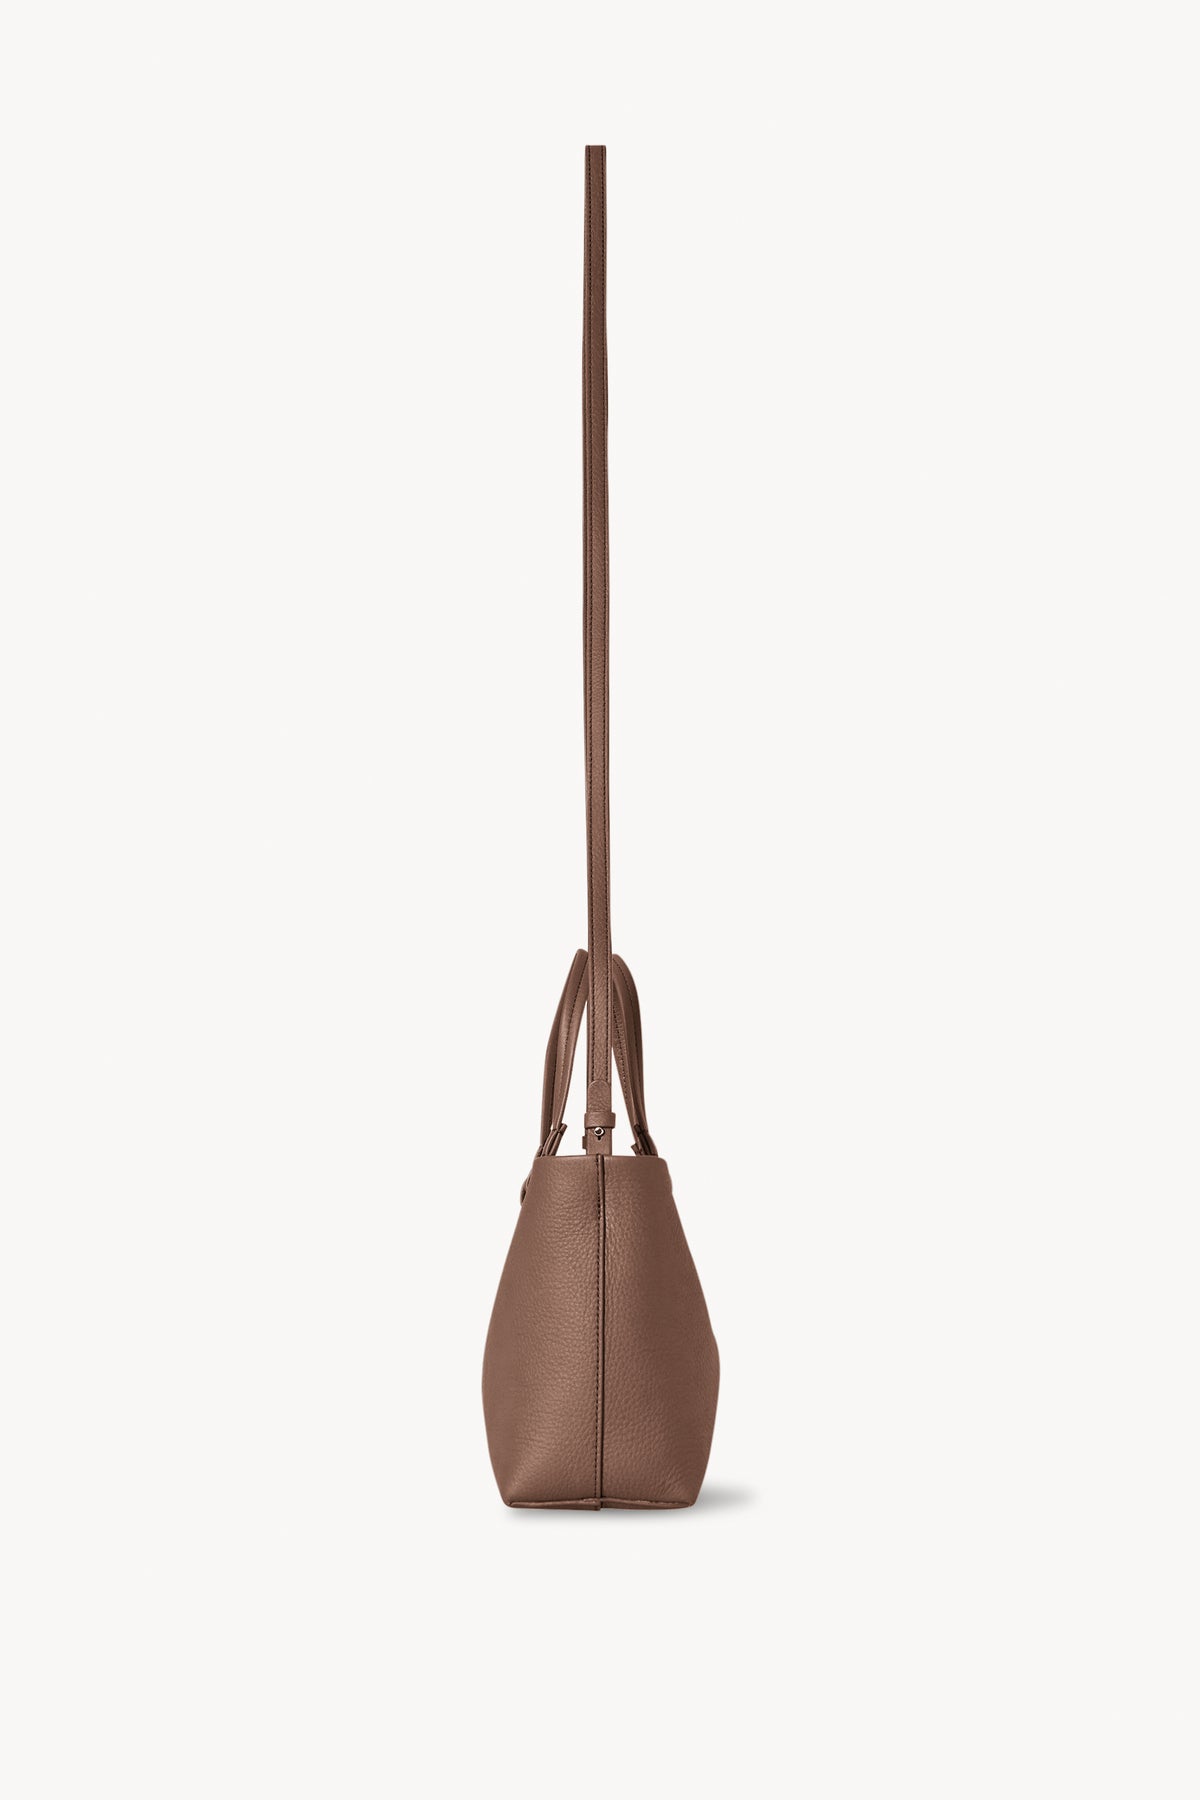 The Row Tan Small N/S Park Tote for Women